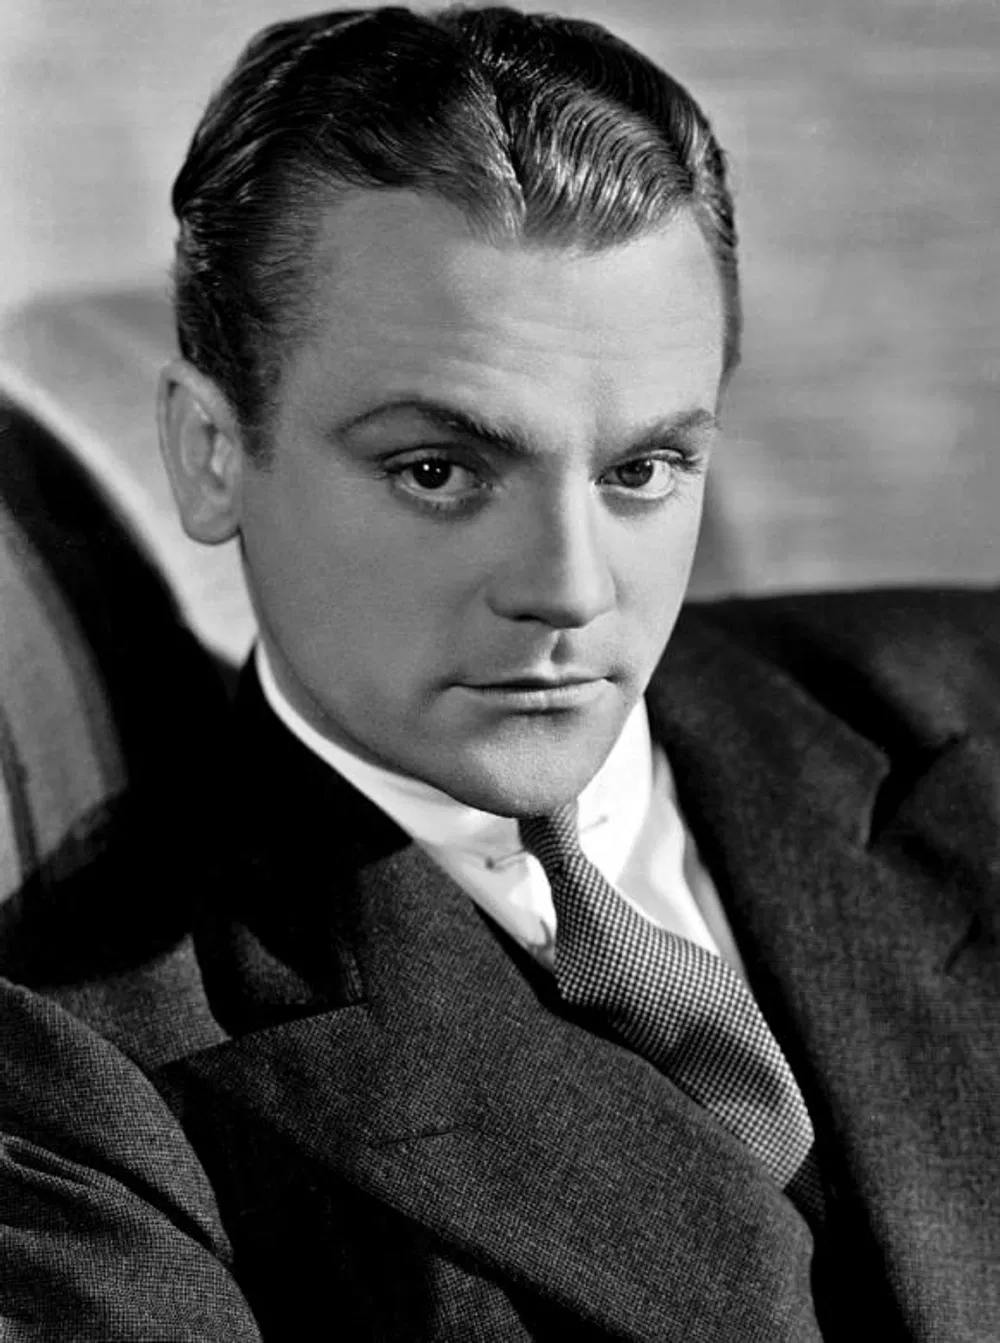 James Cagney, in a studio promo still / Photo by Creative Commons.